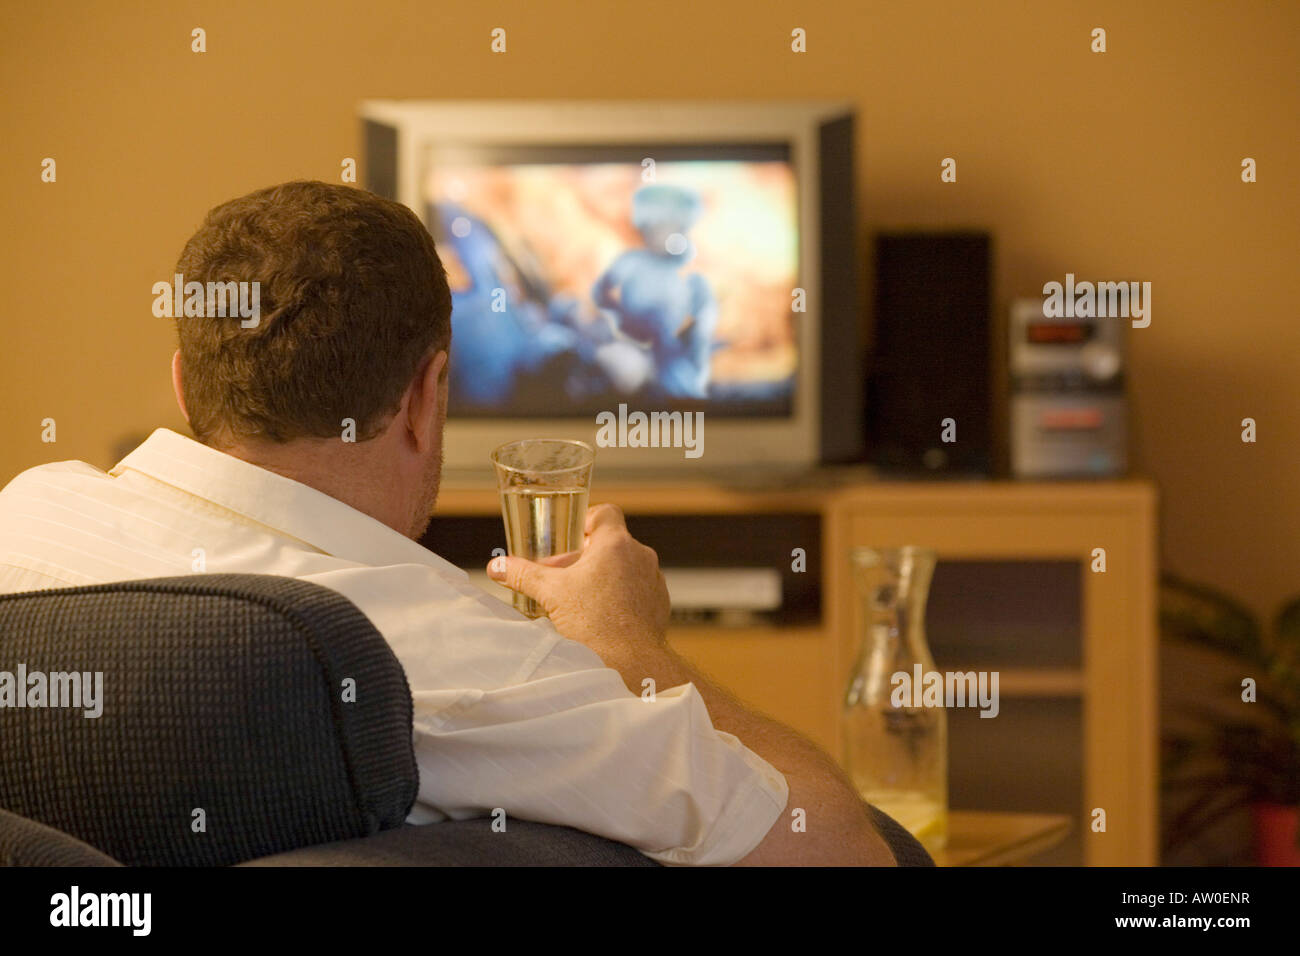 TV VIOLENCE 3 A man watching war film on a television. Hes drinking liquid in a glass. Stock Photo